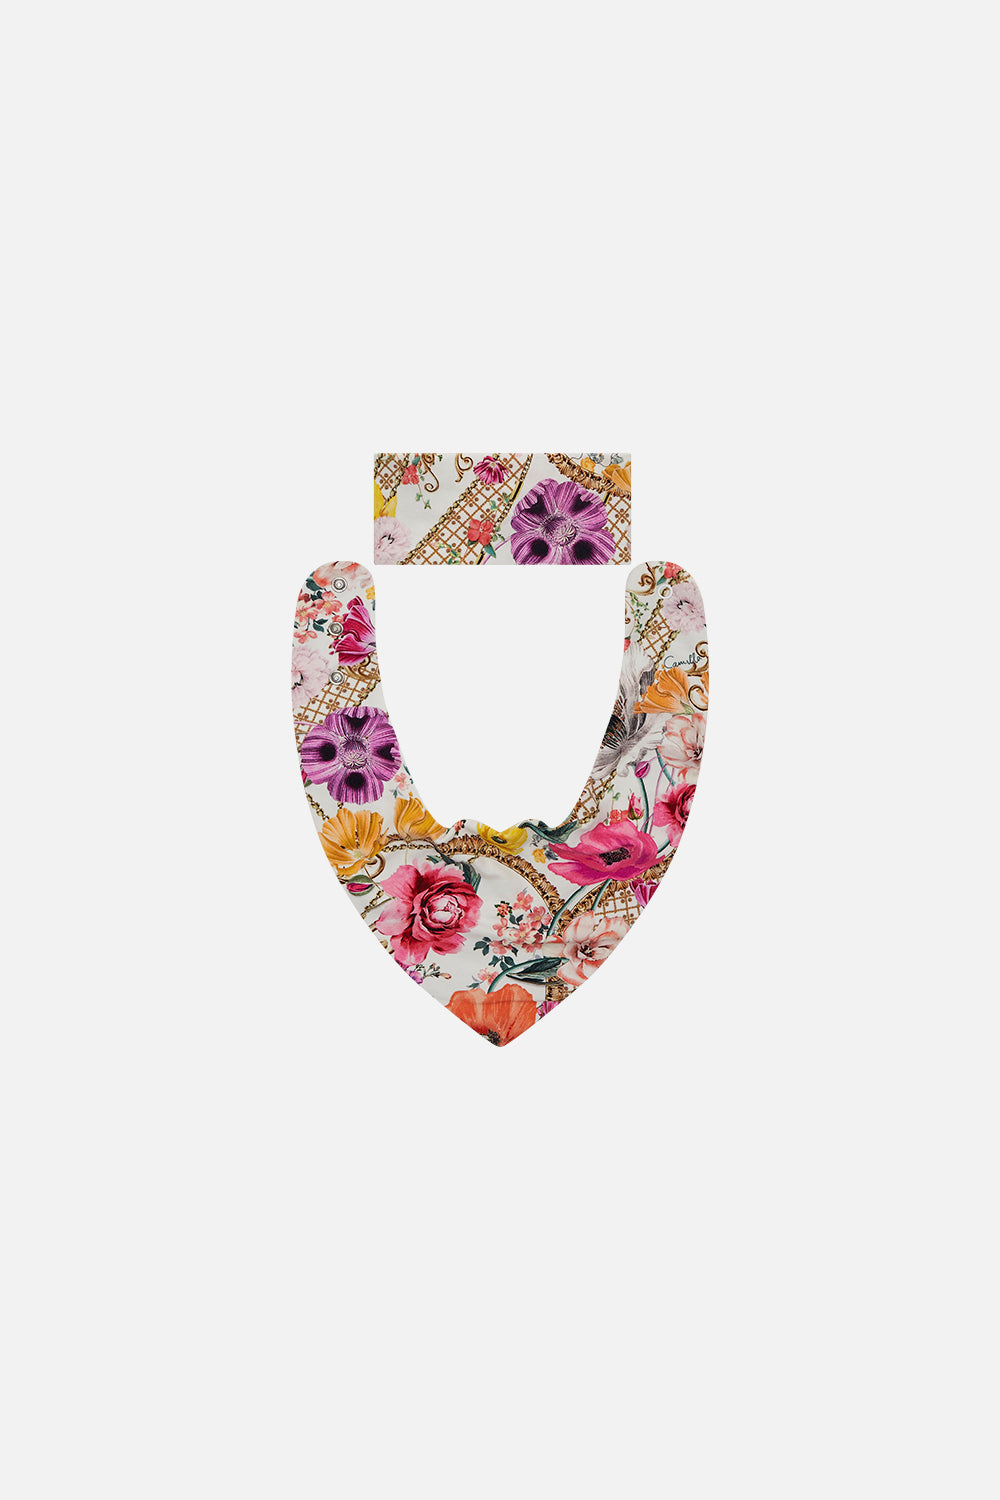 Product view of MILLA By CAMILLA babies floral bib and headband set in Destiny Calling print